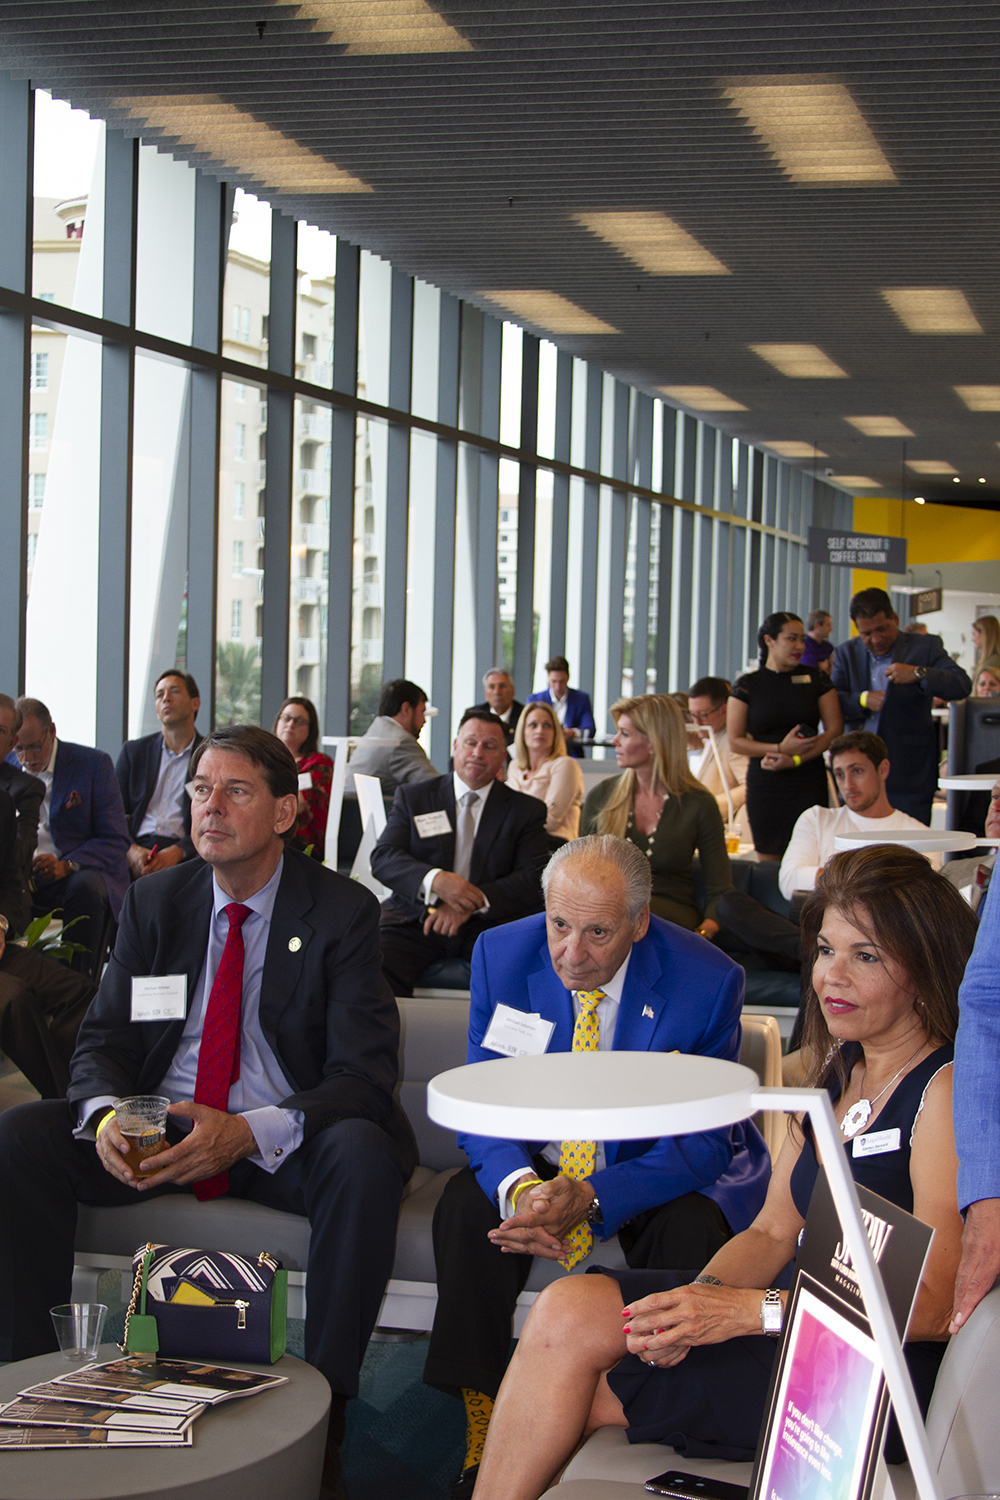 This edition of CEO Connect was held at Brightline’s station in West Palm Beach